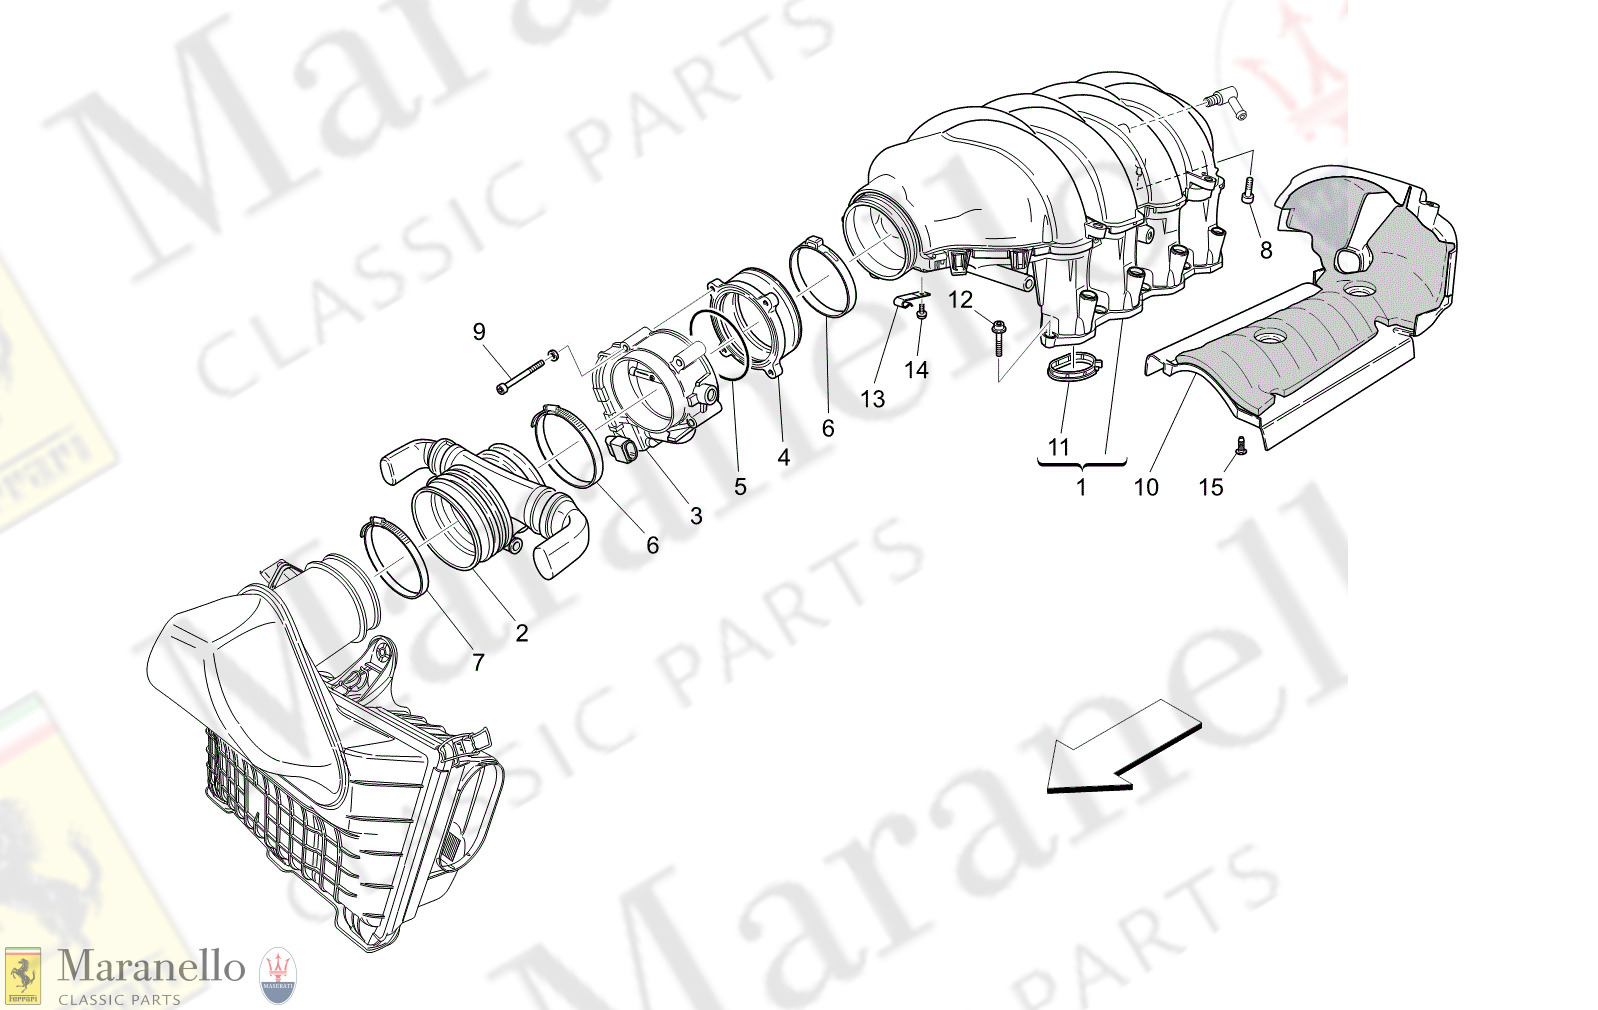 01.40 - 1 - 0140 - 1 Intake Manifold And Throttle Body